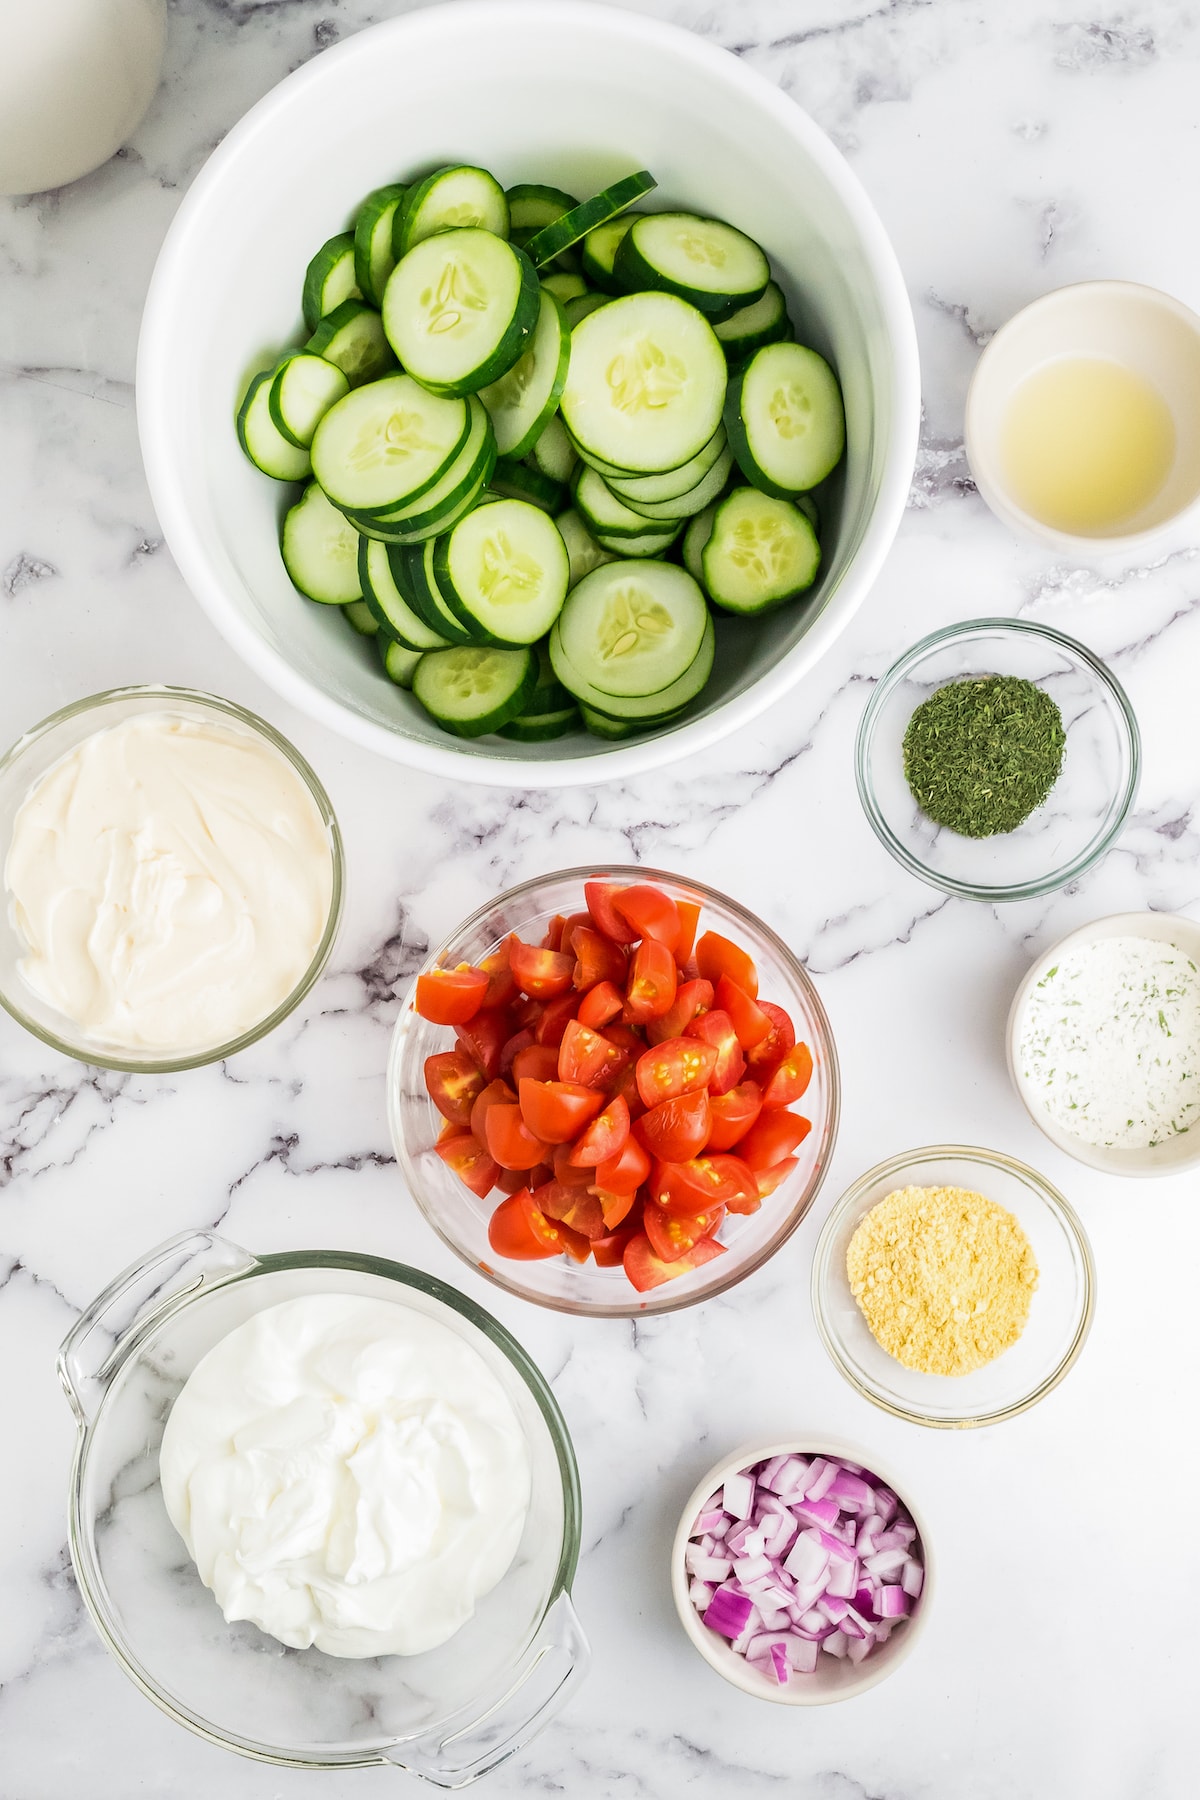 ingredients to make cucumber salad like a bowl of sliced cucumbers, tomatoes, seasonings, and dressing